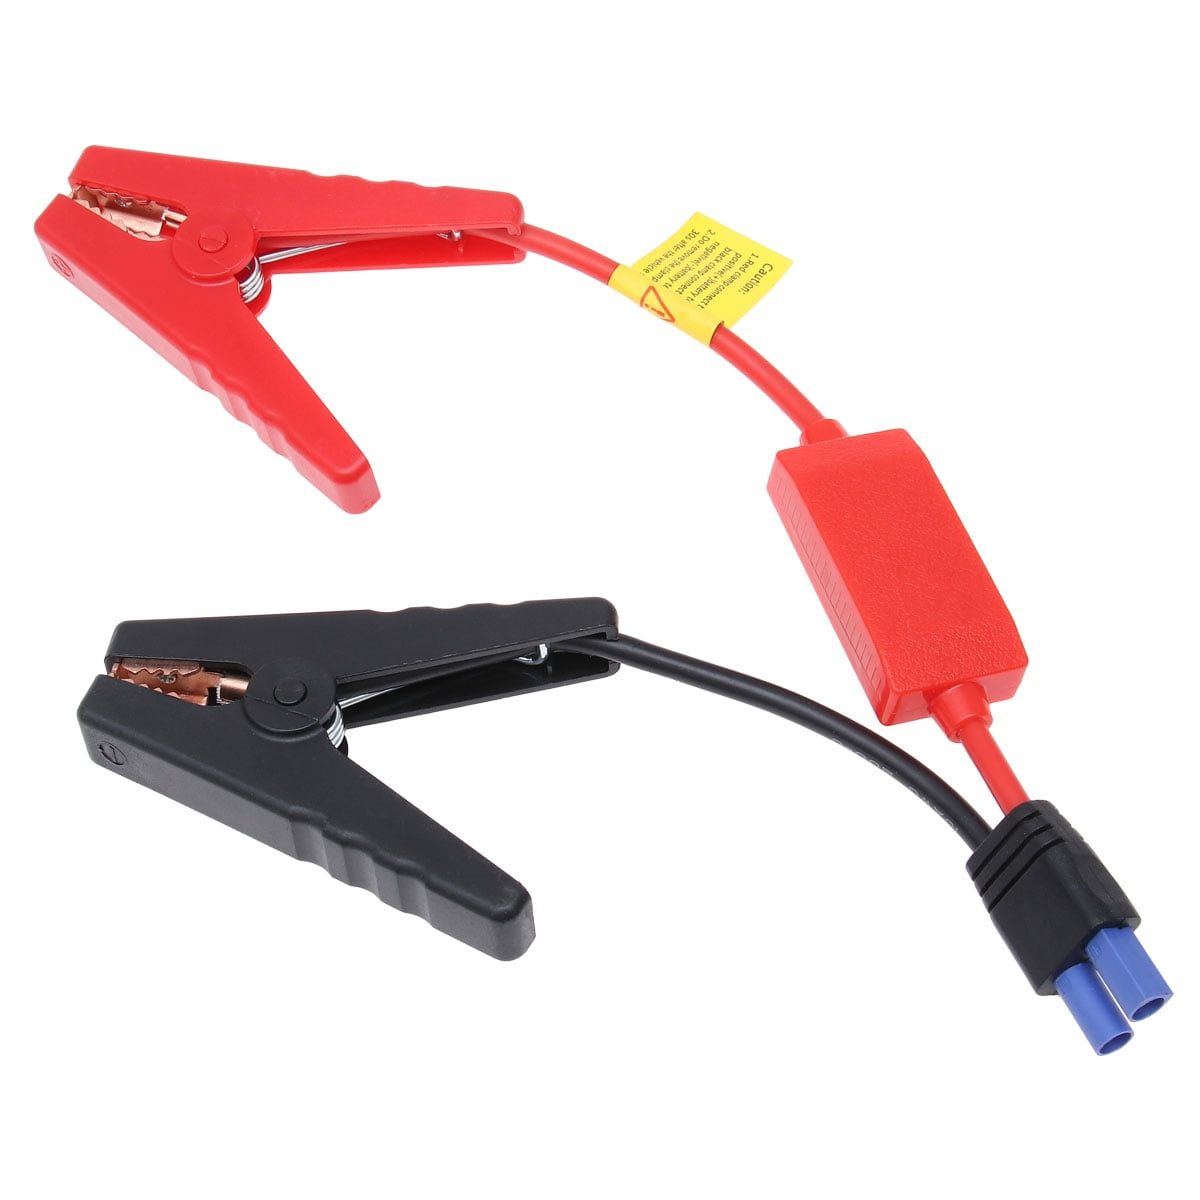 Automotive Replacement Battery Jumper Starter Cables For Car Battery Connection Emergency Alligator Clamp Booster Battery Clips Booster Jumper Cables Starter Cables